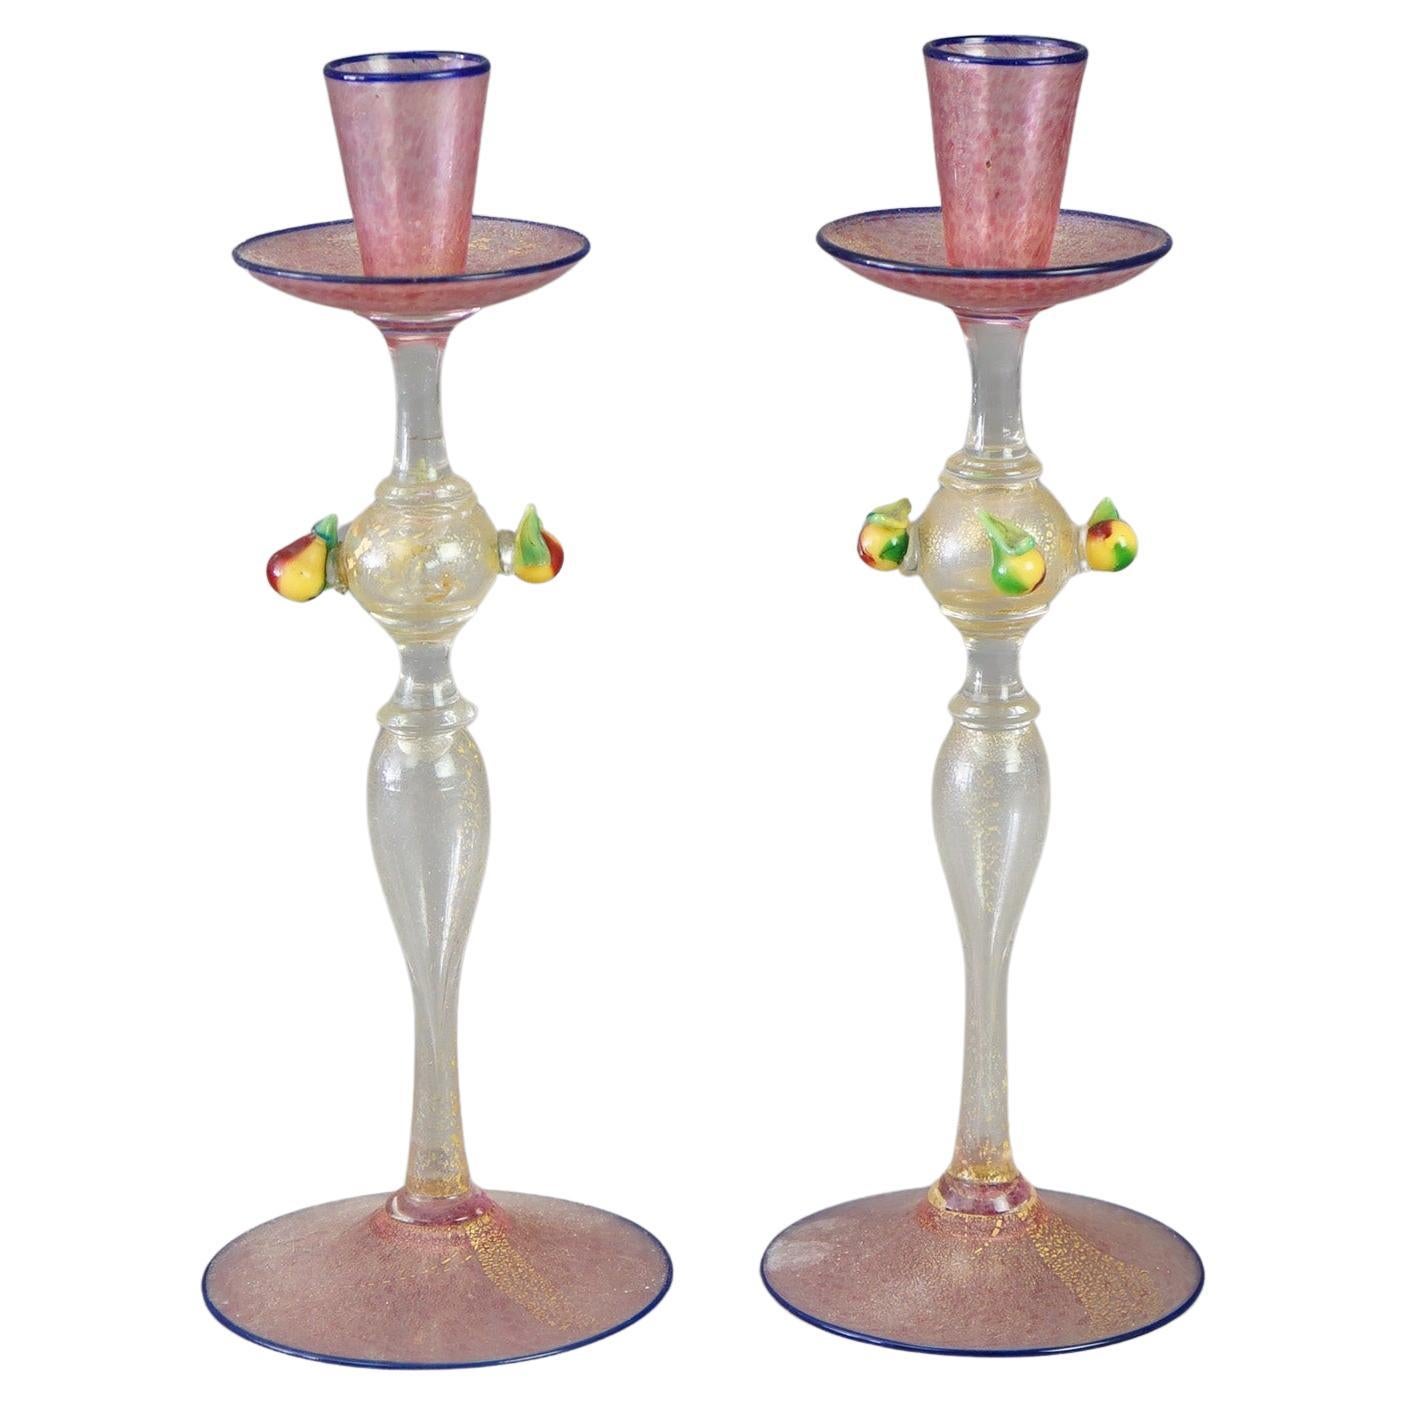 Antique Pair of Venetian Murano Art Glass Candlesticks with Pears Circa 1920 For Sale